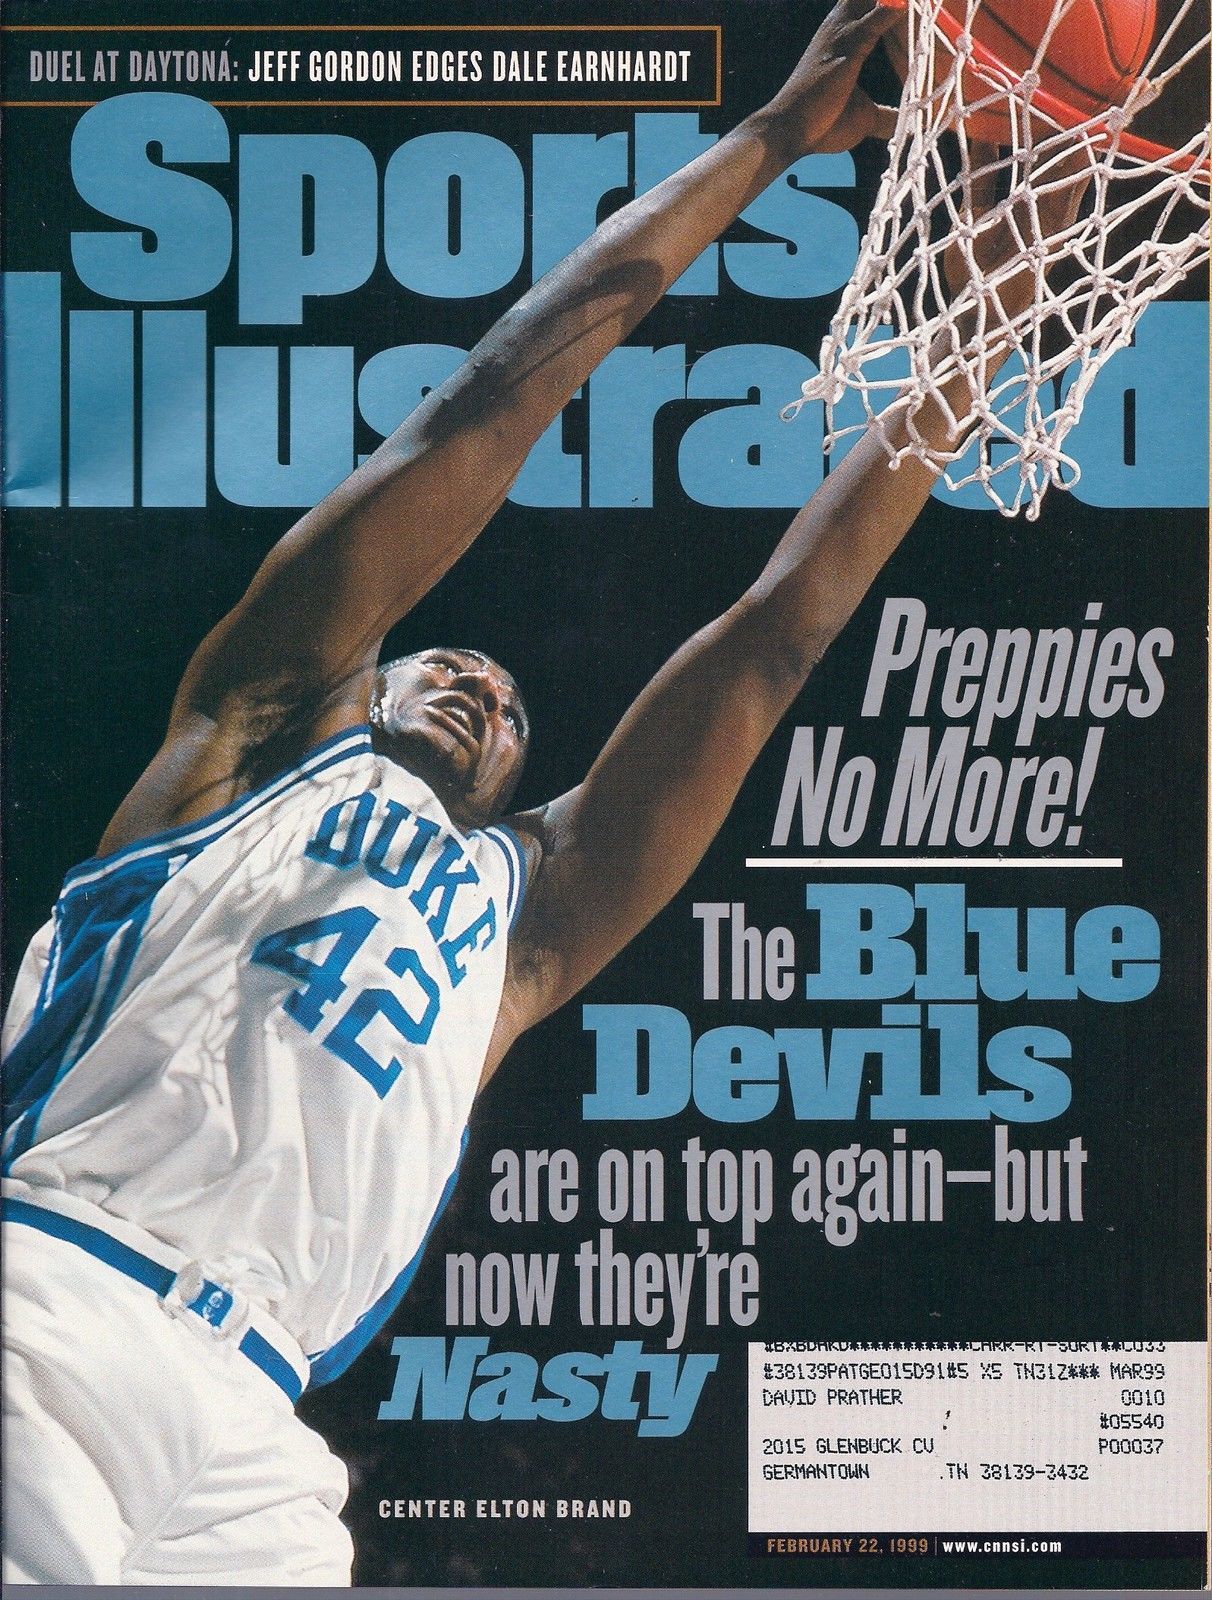 Sports Illustrated Magazine February 22, 1998 Preppies No More! The Blue Devils - $1.50